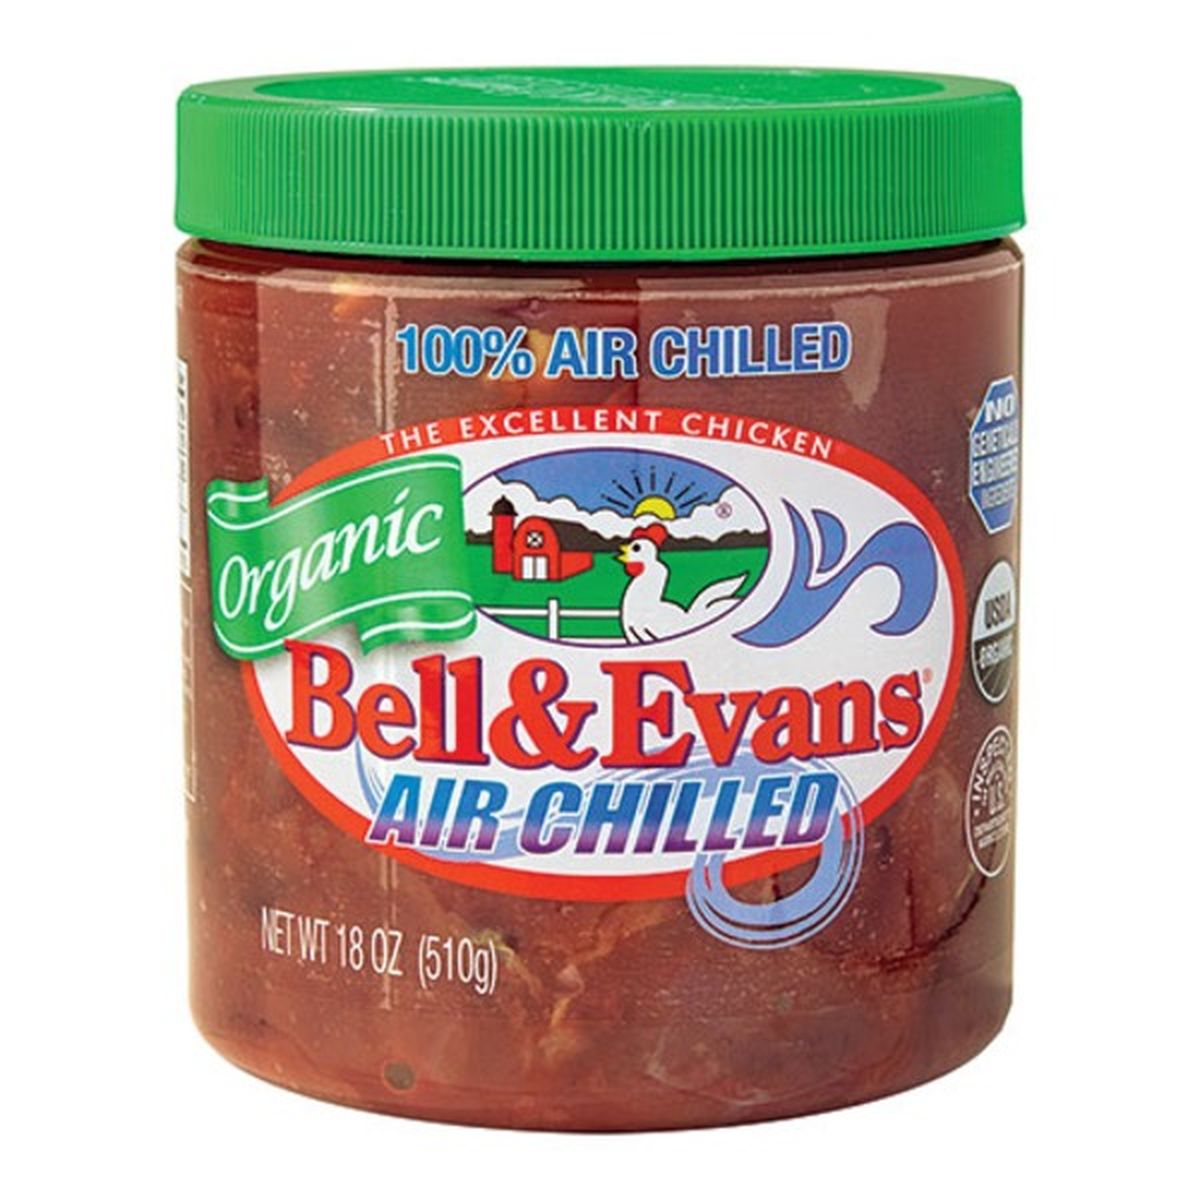 Calories in Bell & Evans Organic Air Chilled Chicken Livers